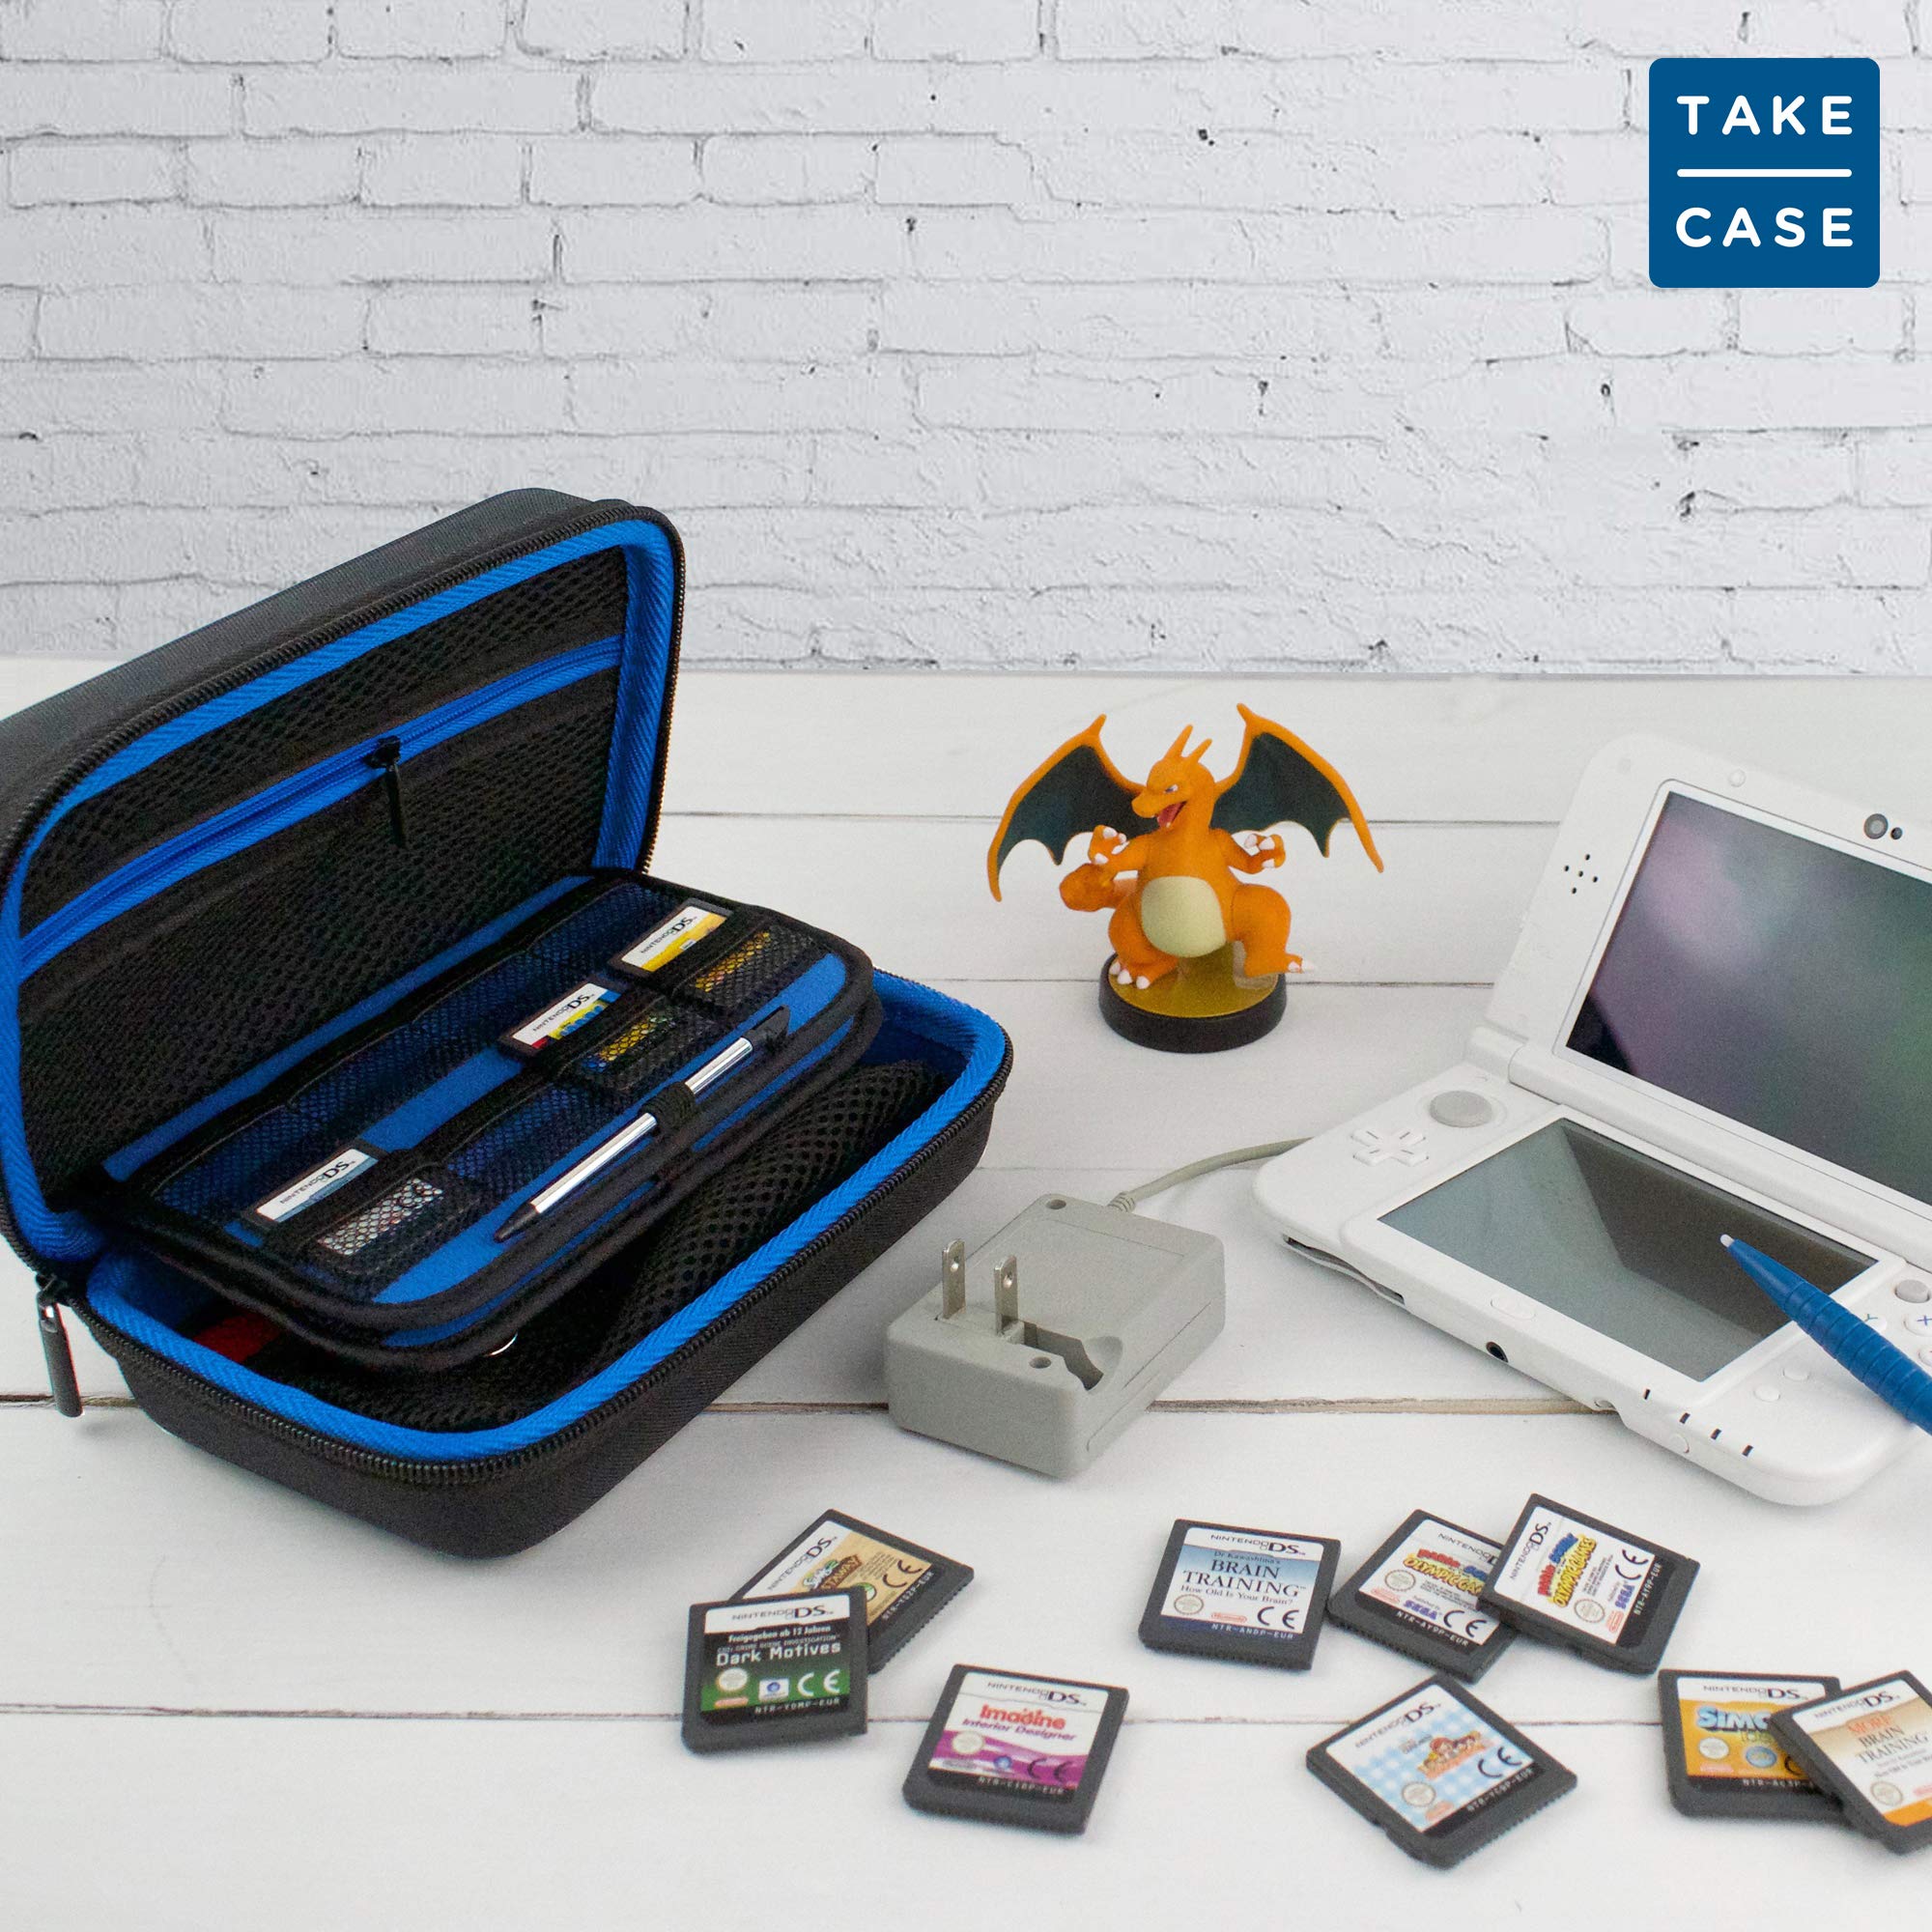 TAKECASE Hard Shell Carrying Case - Compatible with Nintendo 3DS XL and 2DS XL - Fits 16 Game Cards and Wall Charger - Includes Removable Accessories Pouch and Extra Large Stylus Dark Blue